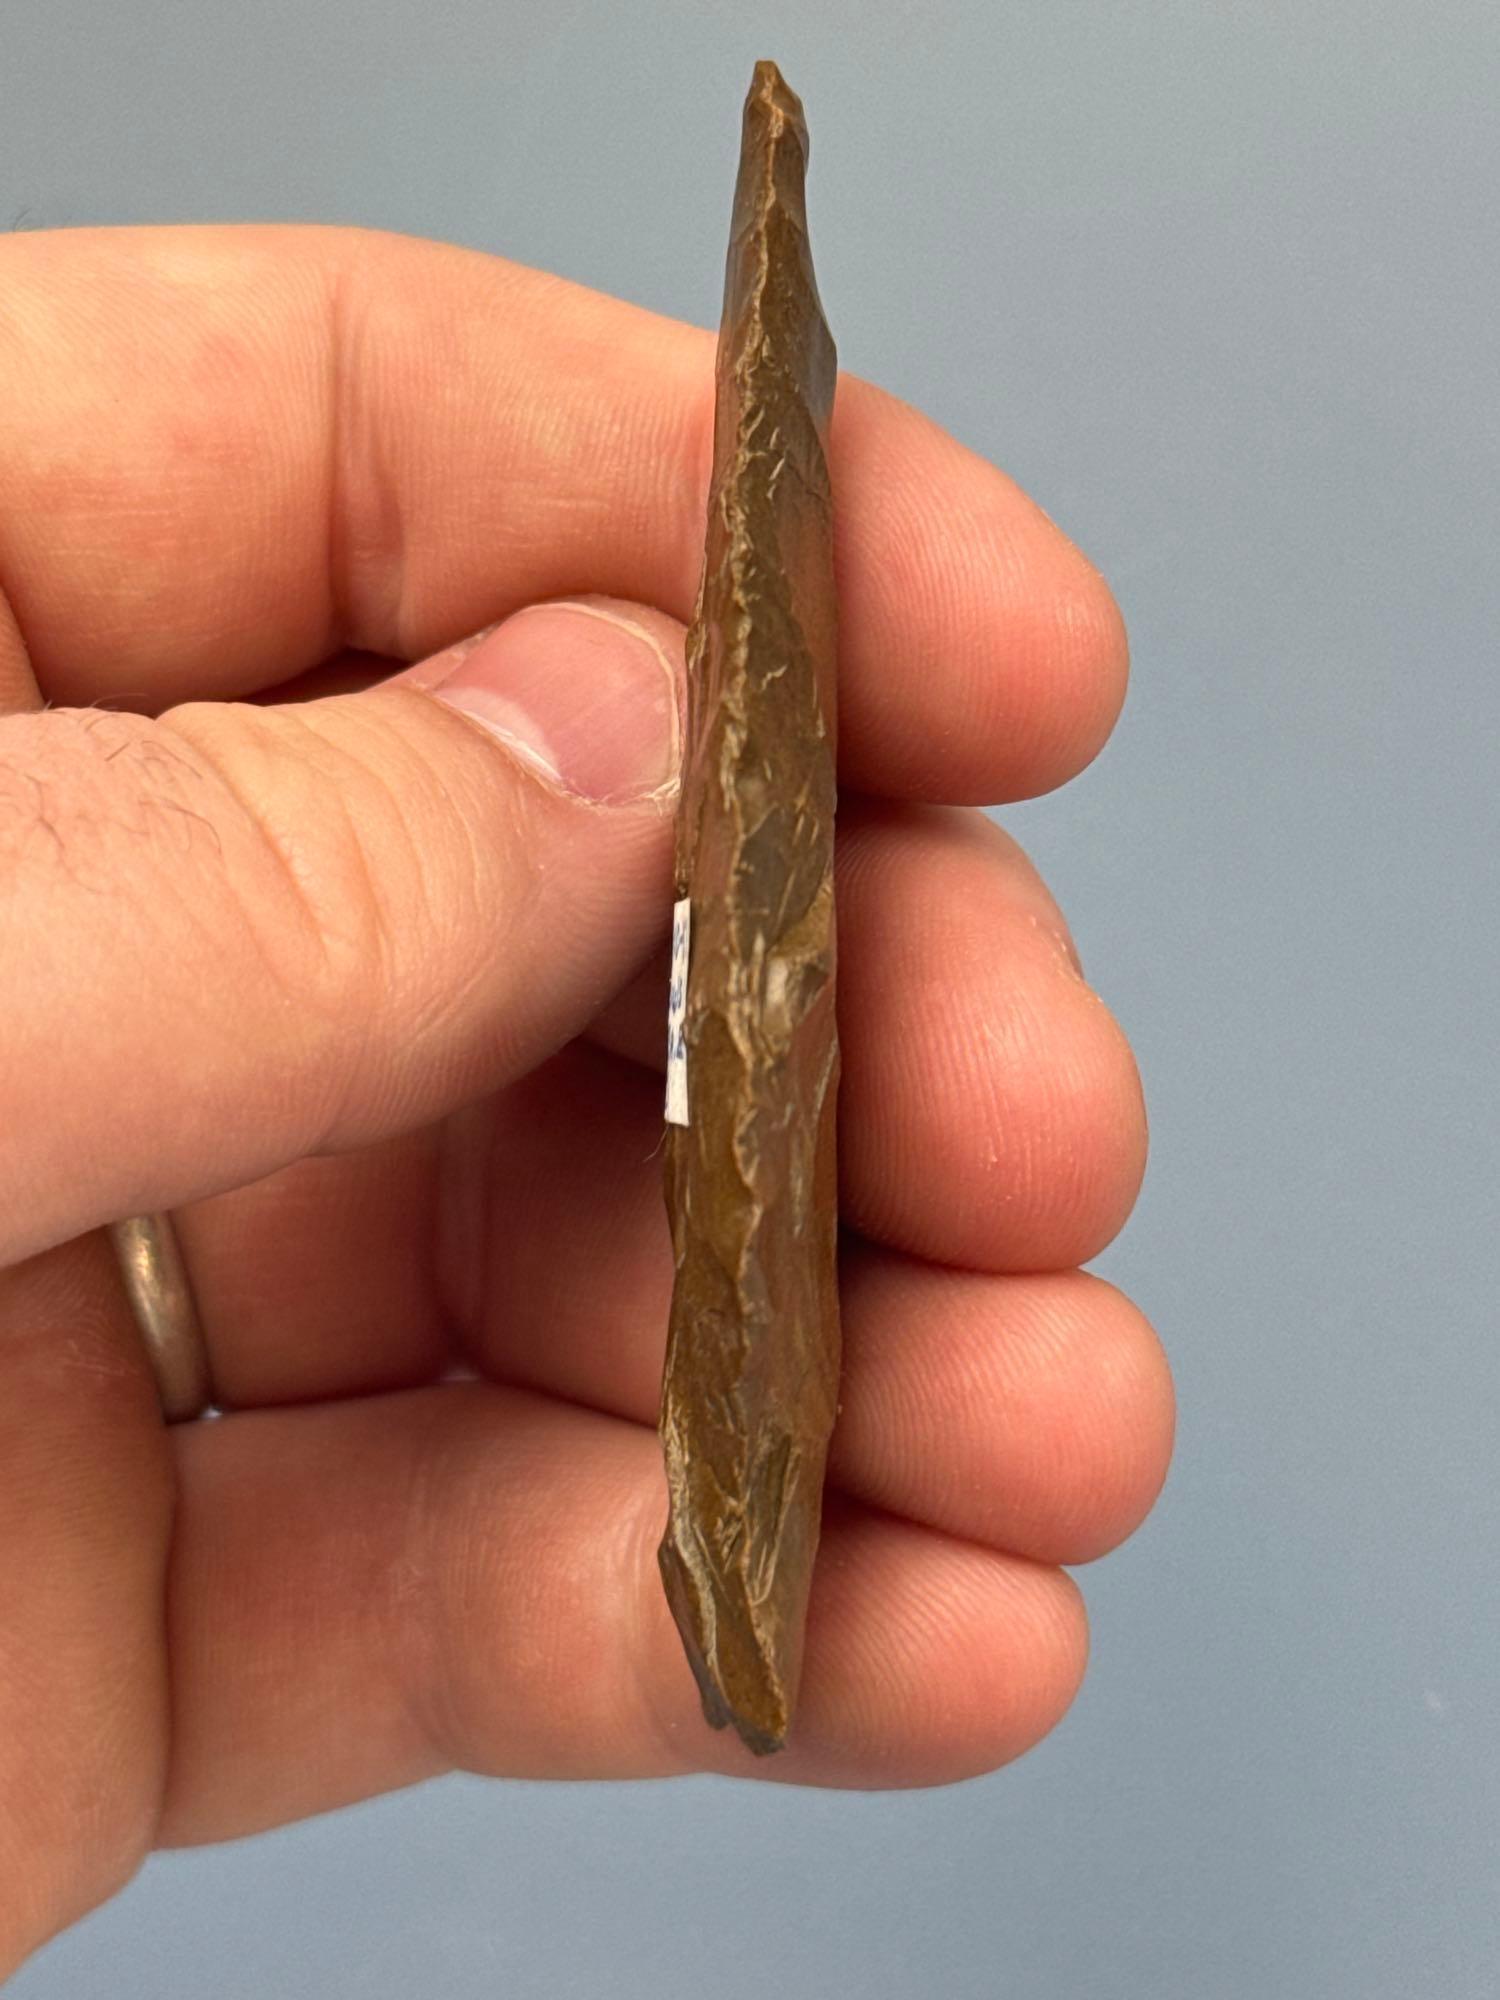 SUPERB 3 1/16" Ex: Doc Bowser Jasper Fishtail, Found at Long Level, York Co., PA, Purchased in 1997